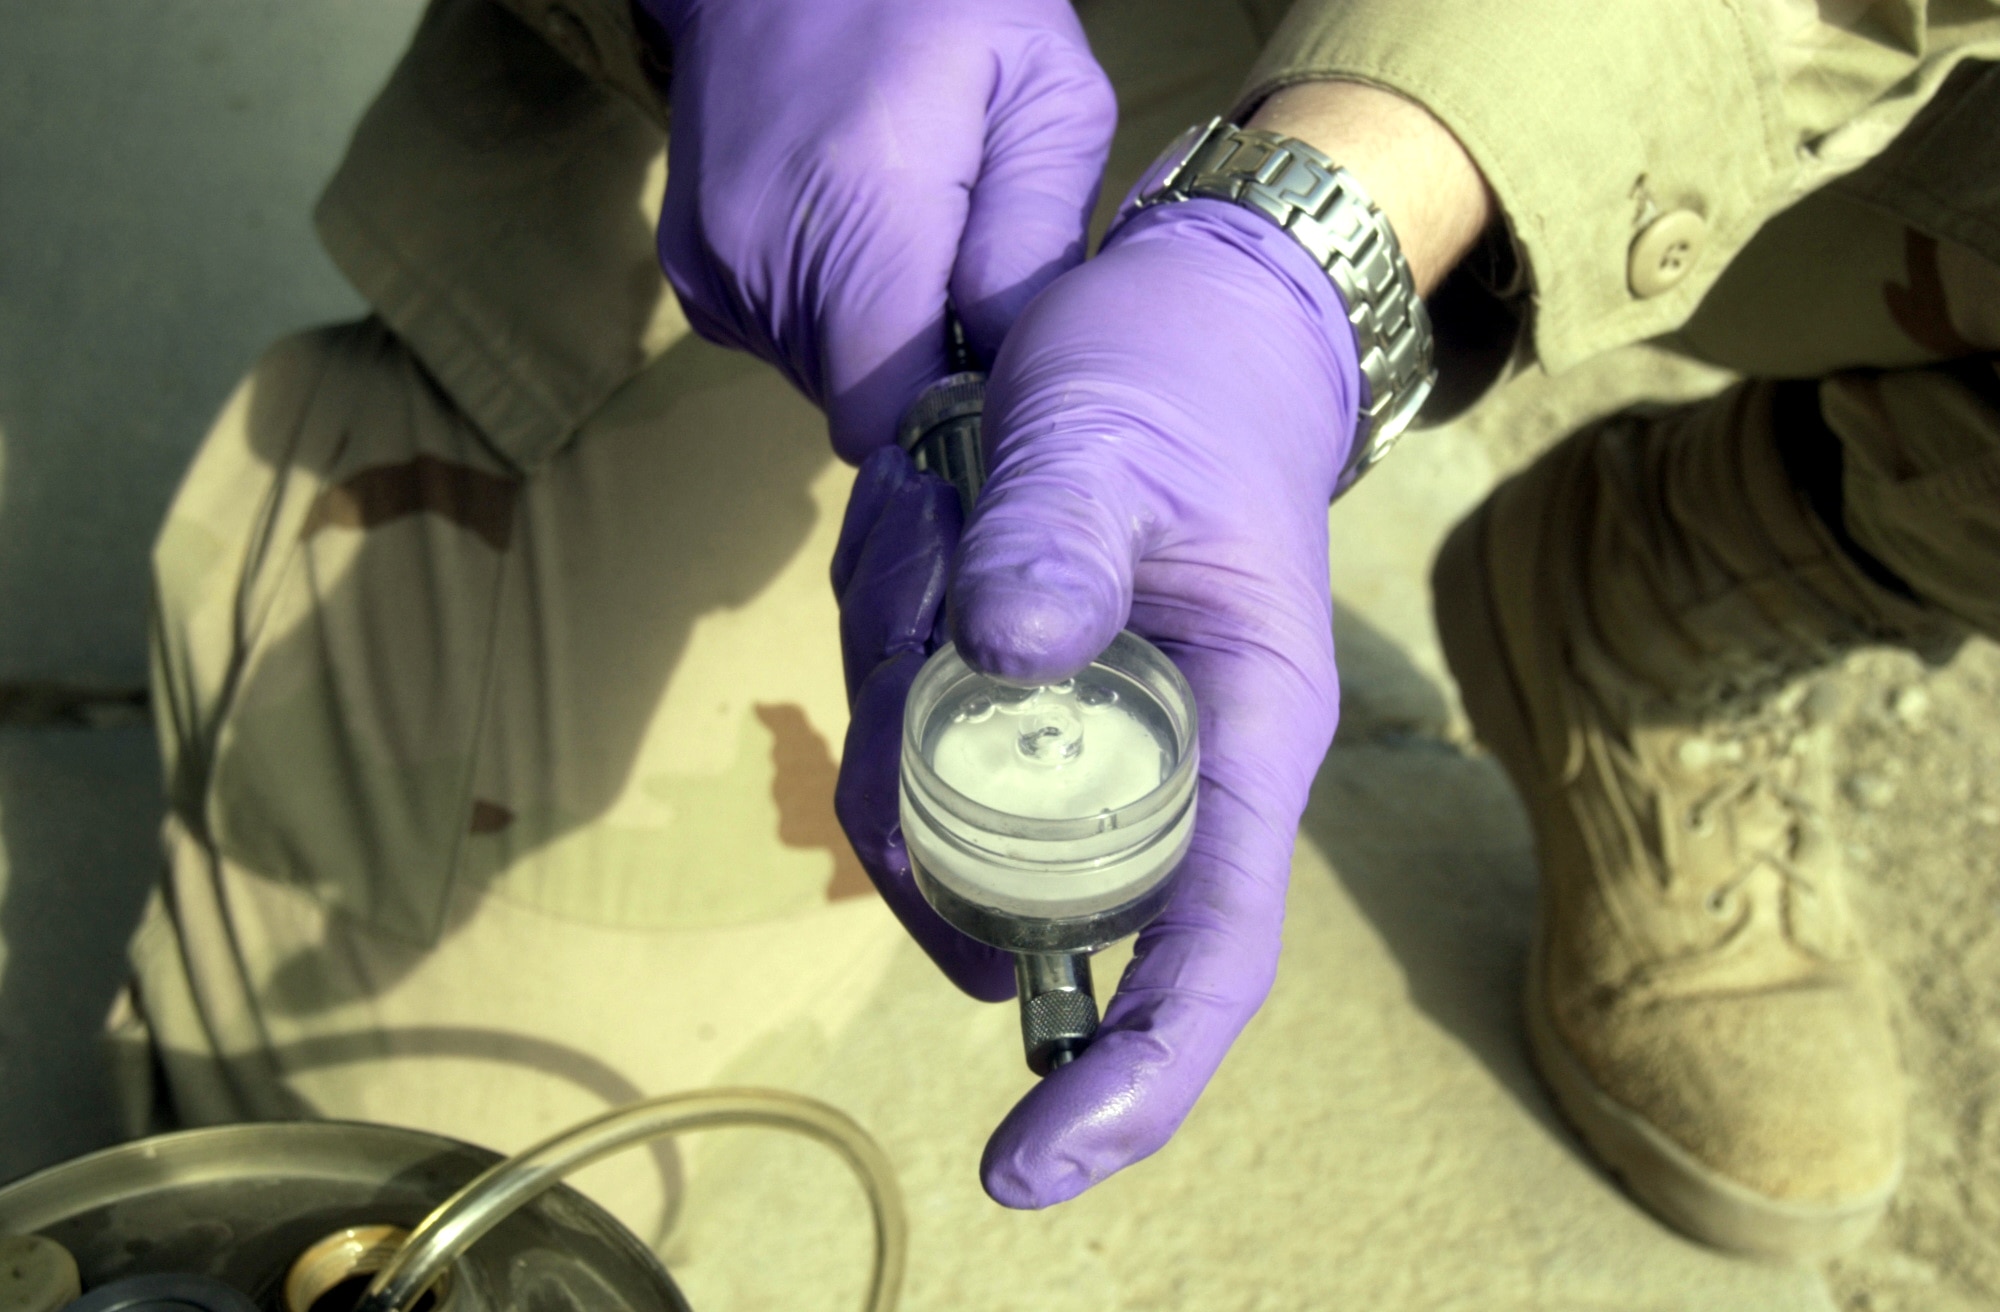 BAGRAM AIR BASE, Afghanistan -- Staff Sgt. Robert Armentrout checks for contamination in a jet fuel sample.  He is a fuels specialist assigned to the 455th Expeditionary Operations Group.  (U.S. Air Force photo by Tech. Sgt. Brian Davidson)